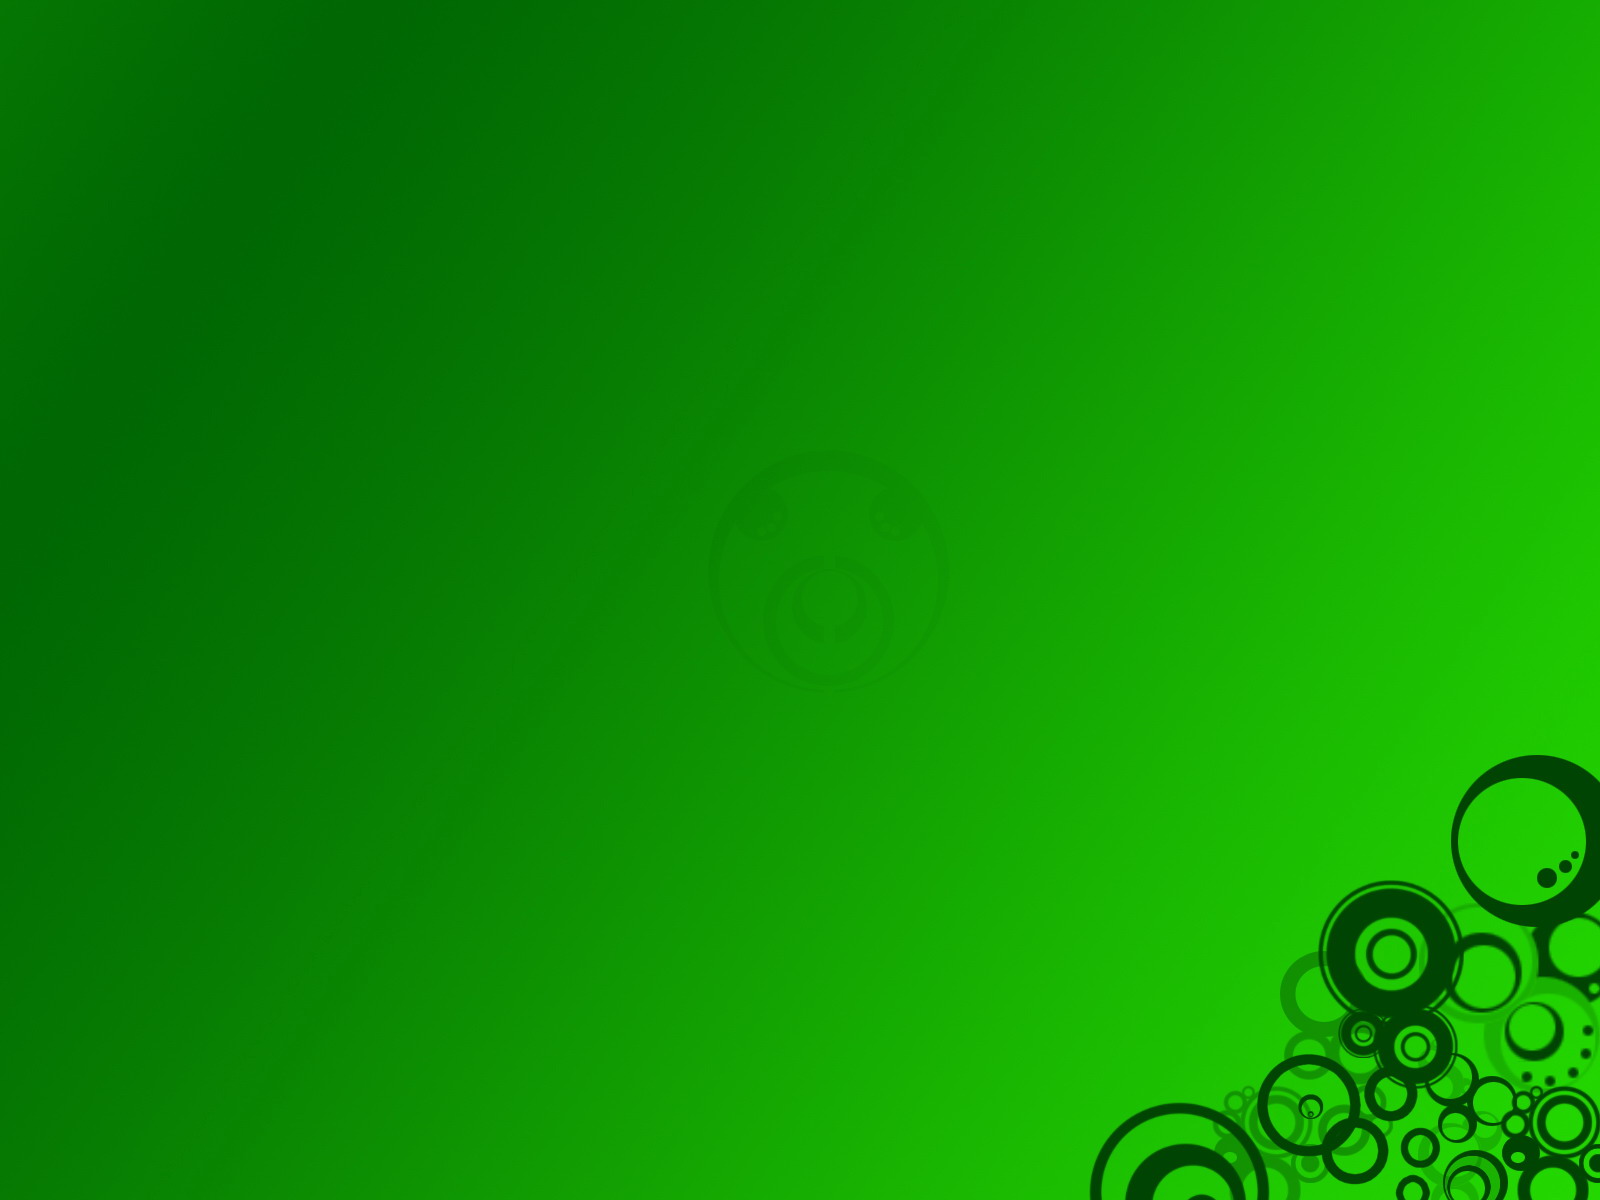 Place For HD Wallpapers Desktop Wallpapers Green Wallpapers 1600x1200